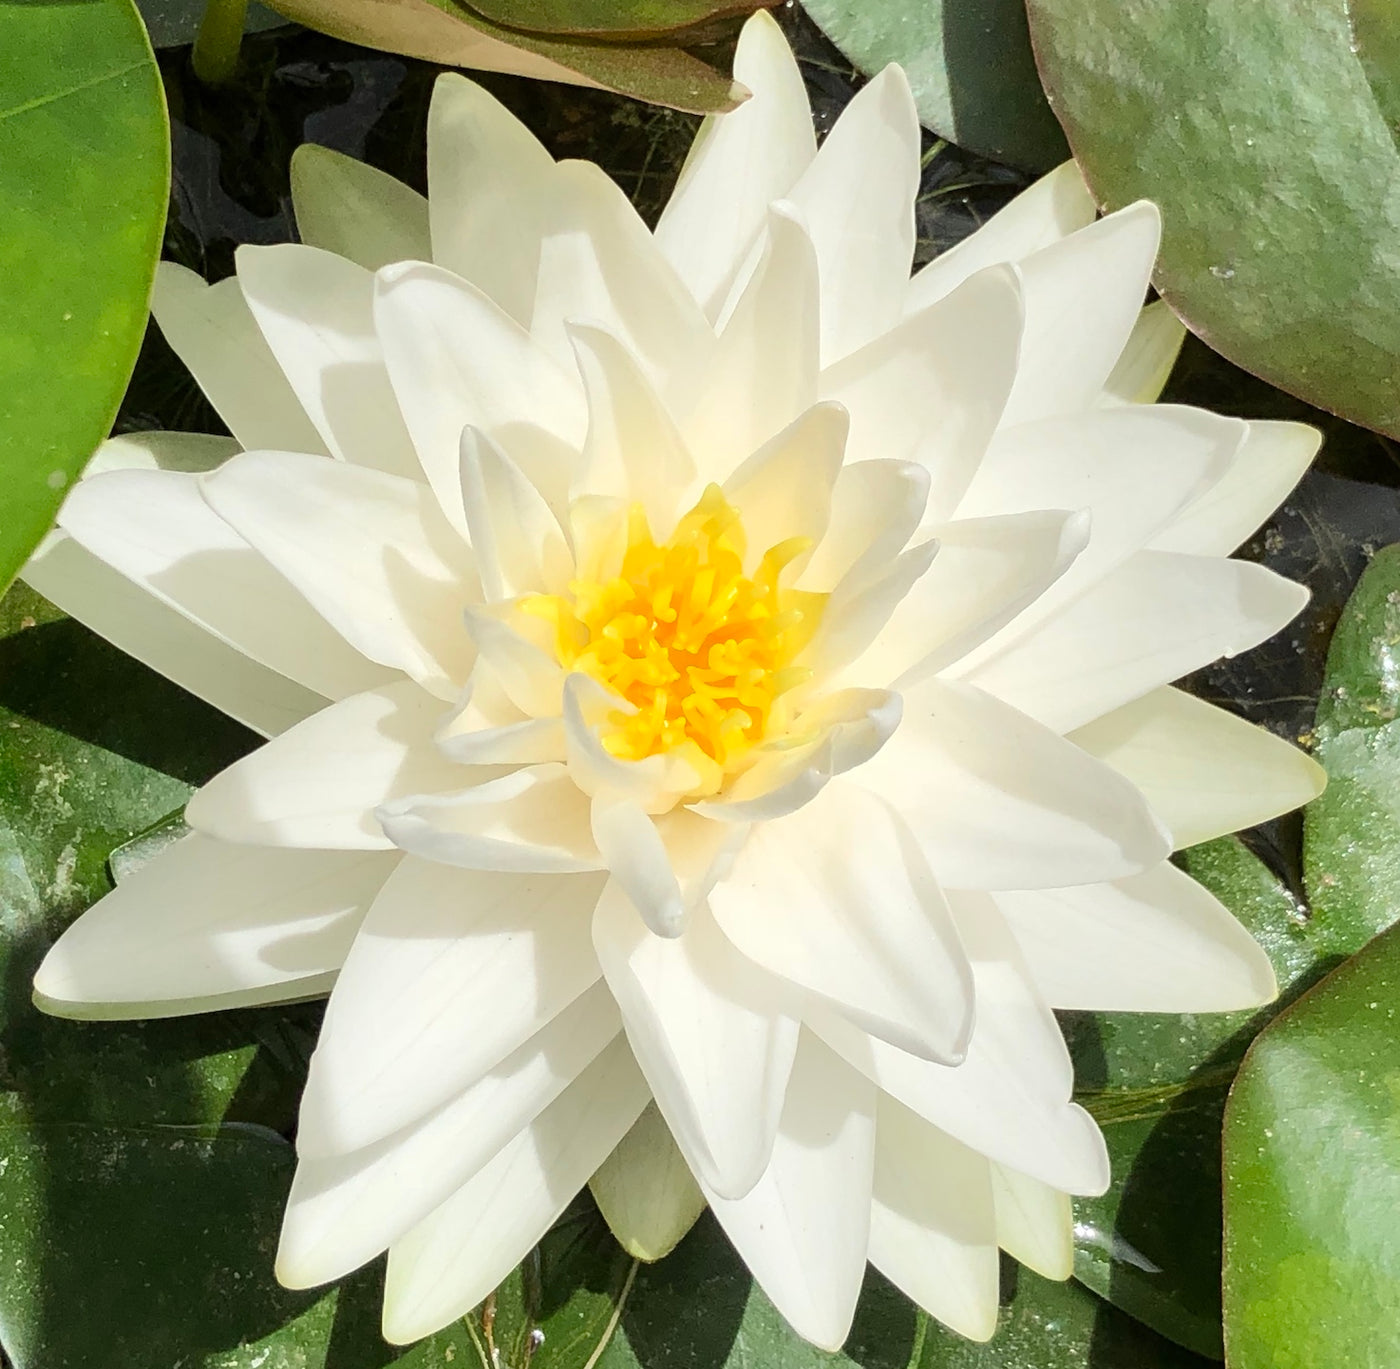 Gonnere White Water lily - Plants for Ponds 